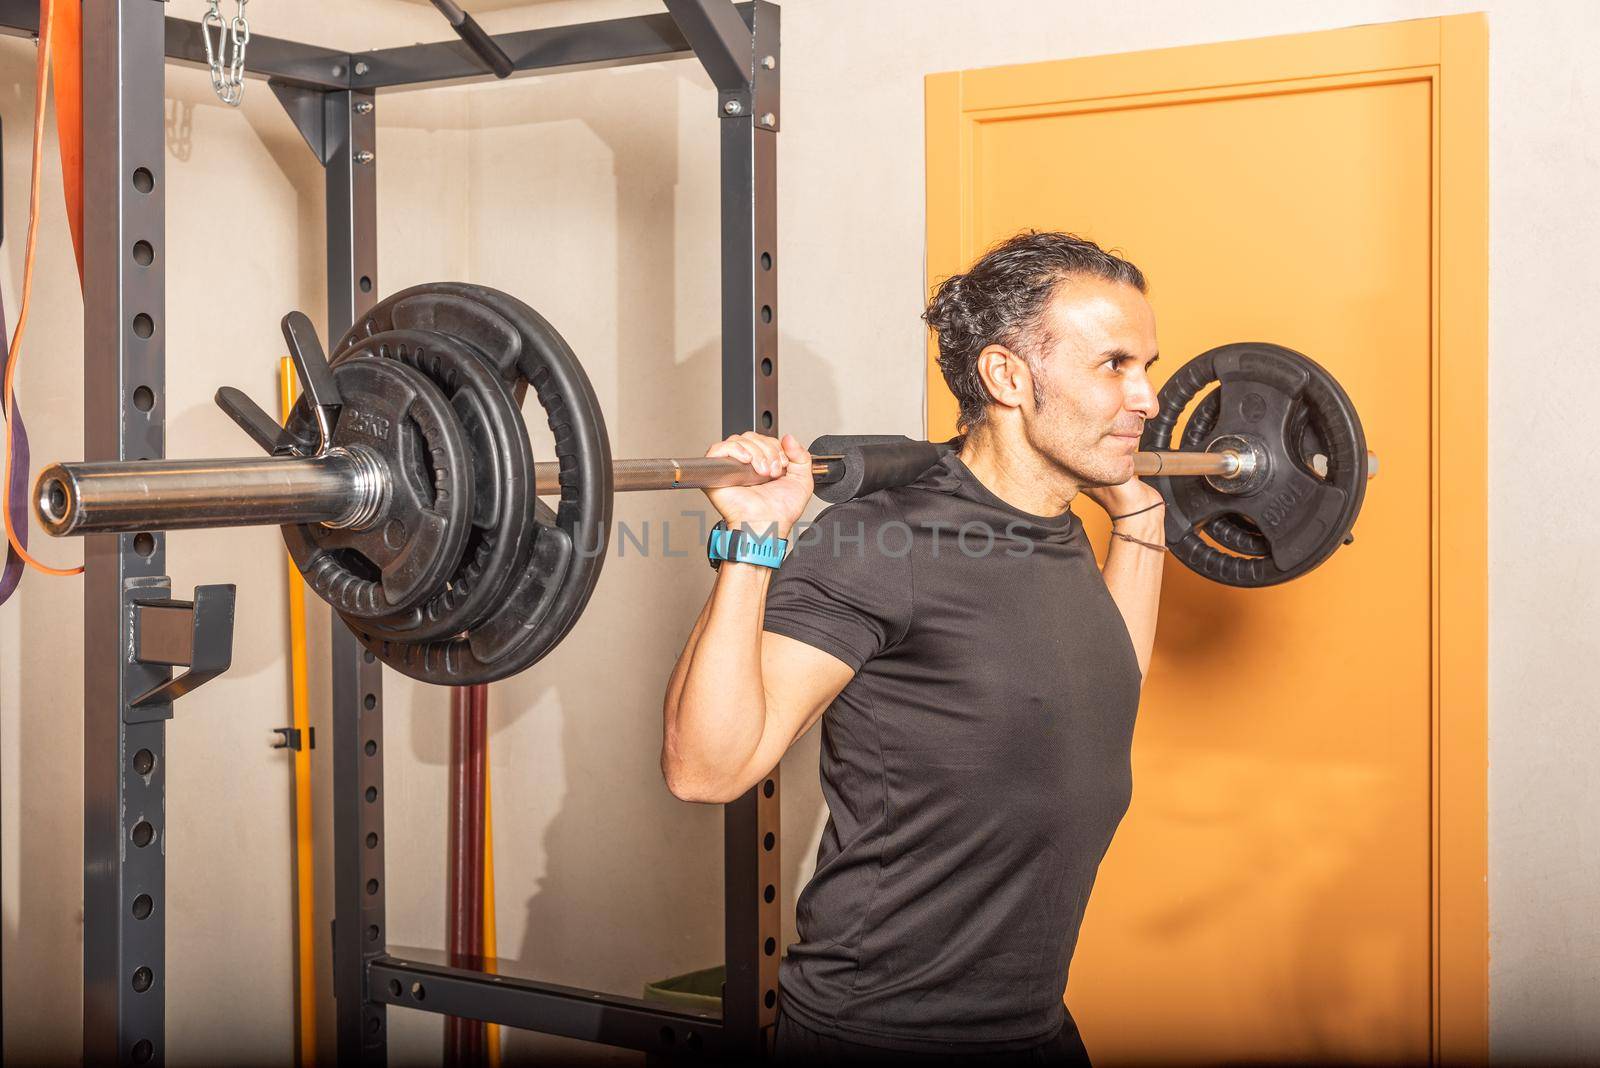 Close up of athlete man doing squats with bar at gym. Concept of exercise in the gym.